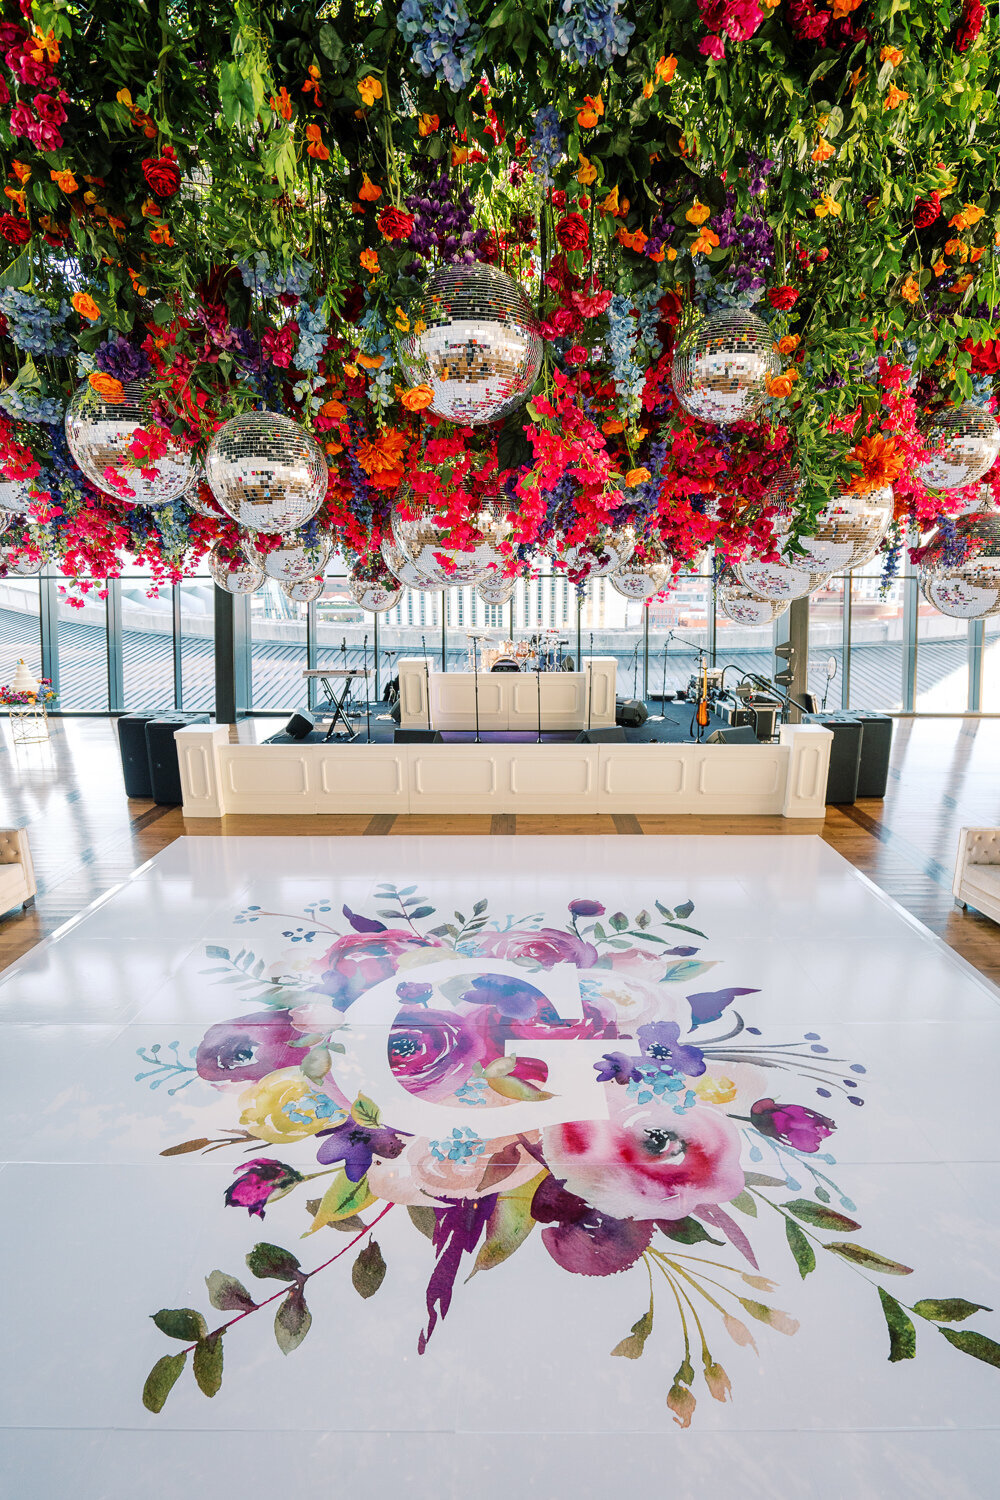 red, blue, yellow, purple flowers and greenery with disco balls hanging from ceiling